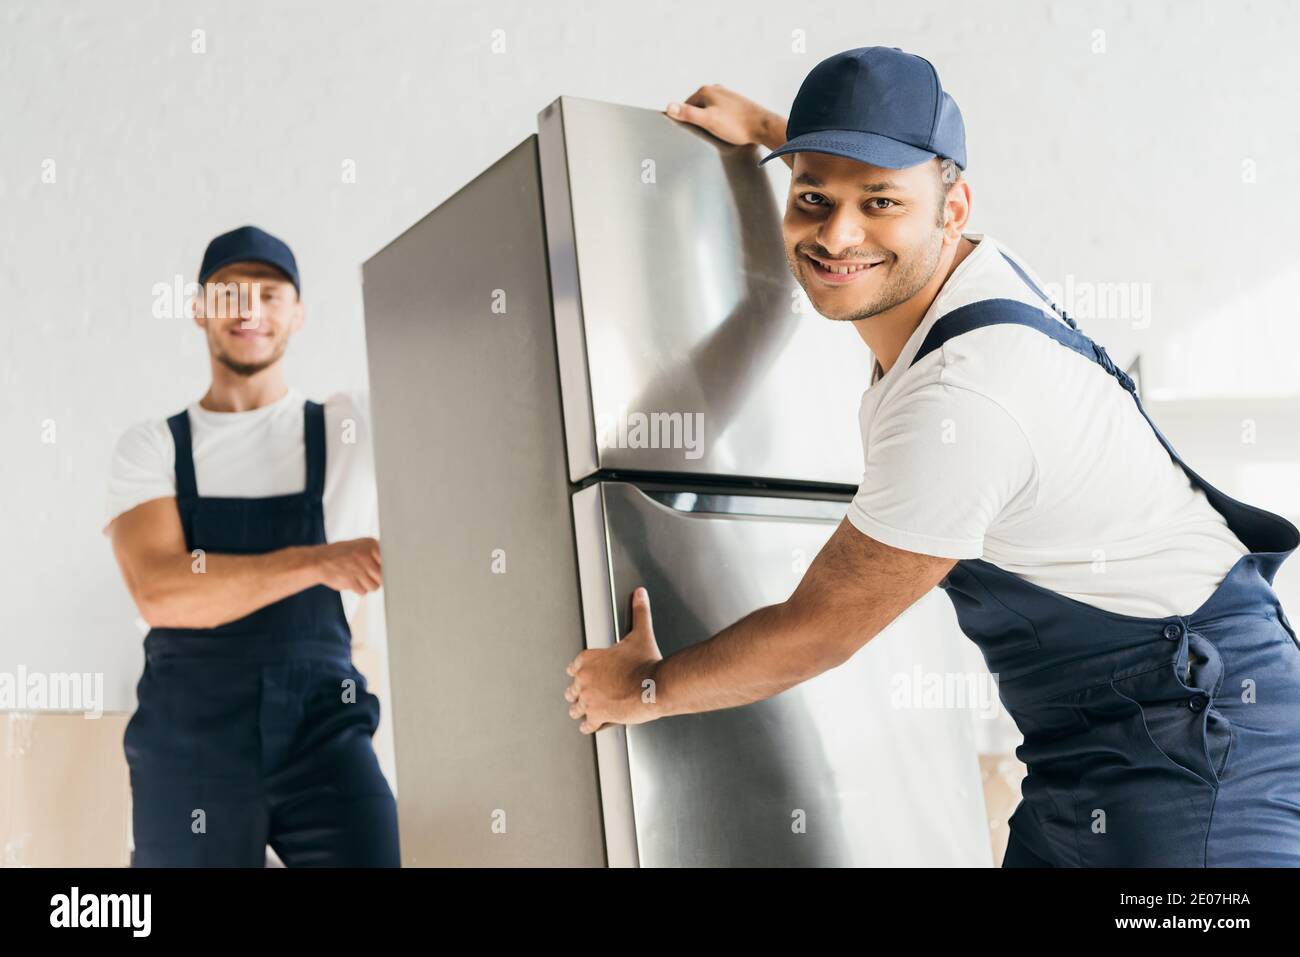 cheerful indian mover in uniform moving fridge near coworker on blurred background Stock Photo